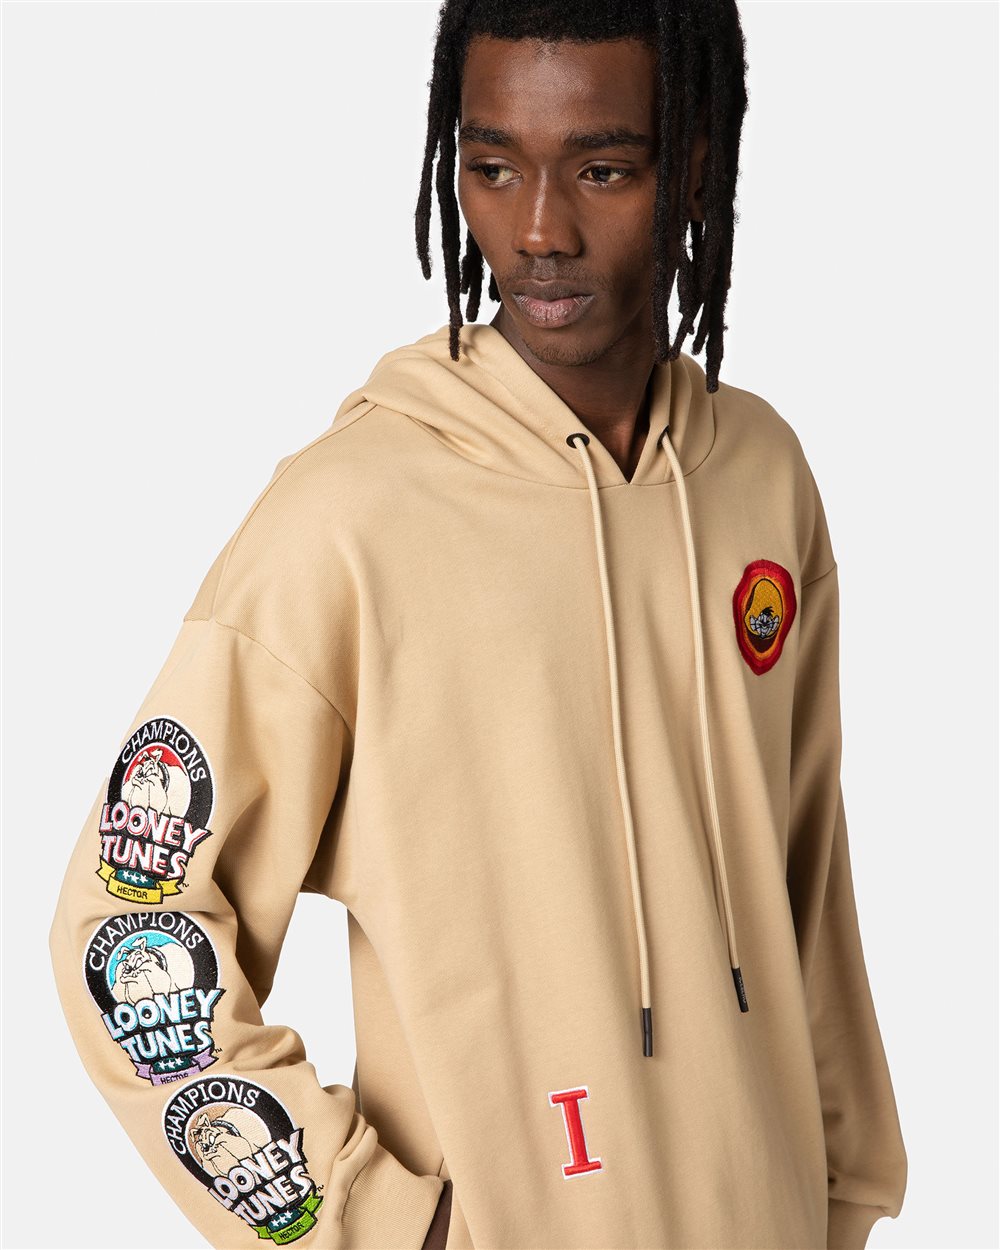 Hooded patches Tunes with | sweatshirt Iceberg Looney